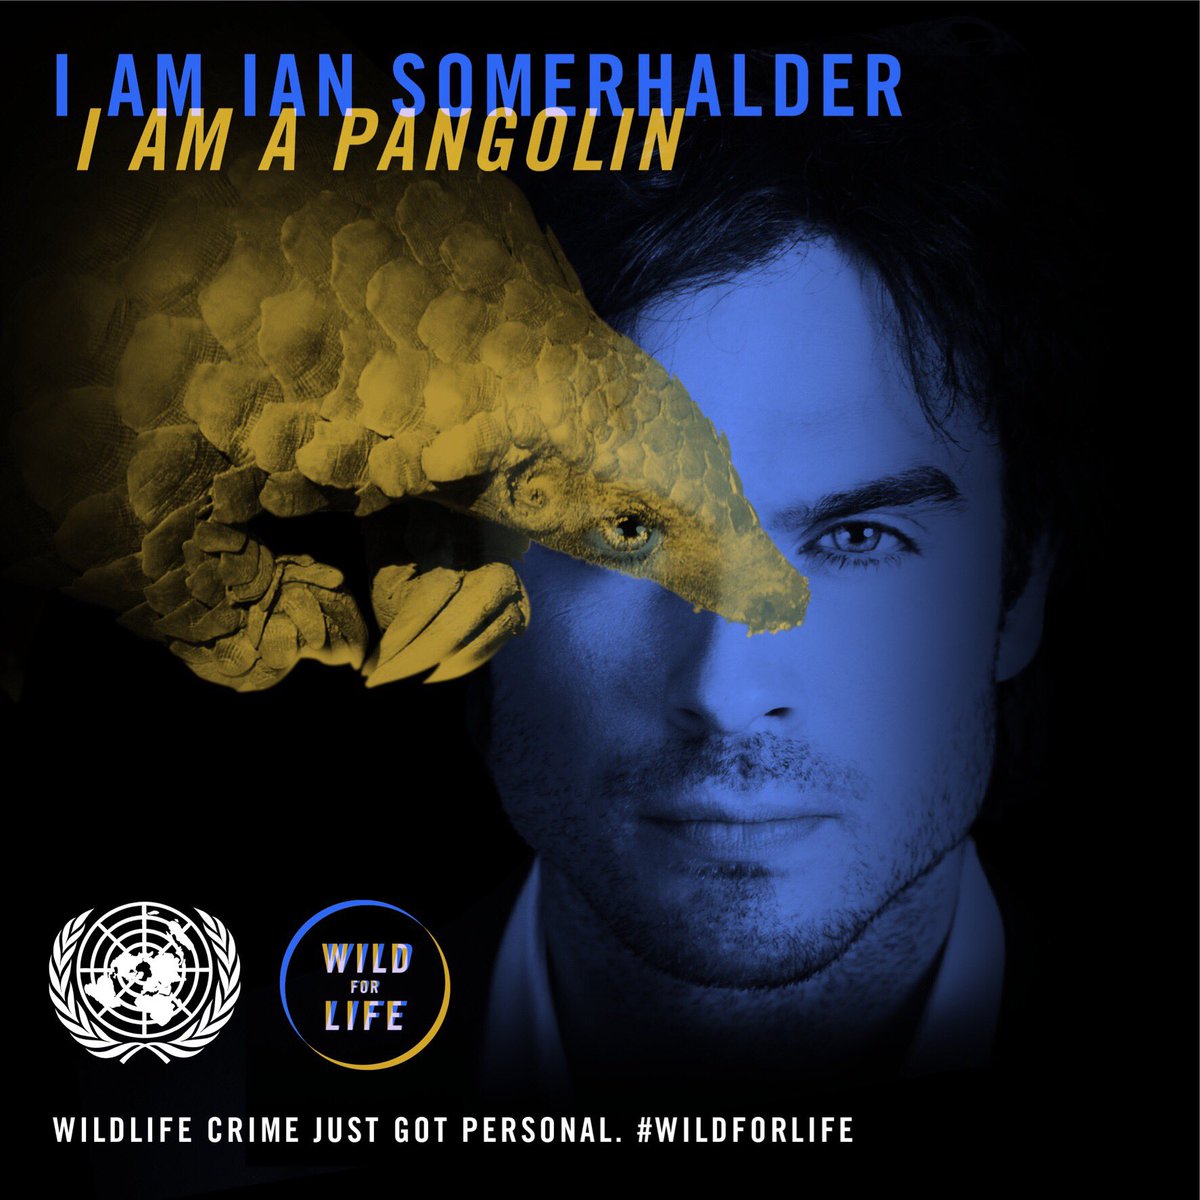 I am Ian. I am a Pangolin. What are you? Find your kindred species https://t.co/uCxCKgwCJC #Wildforlife https://t.co/6y8AnyuLzO